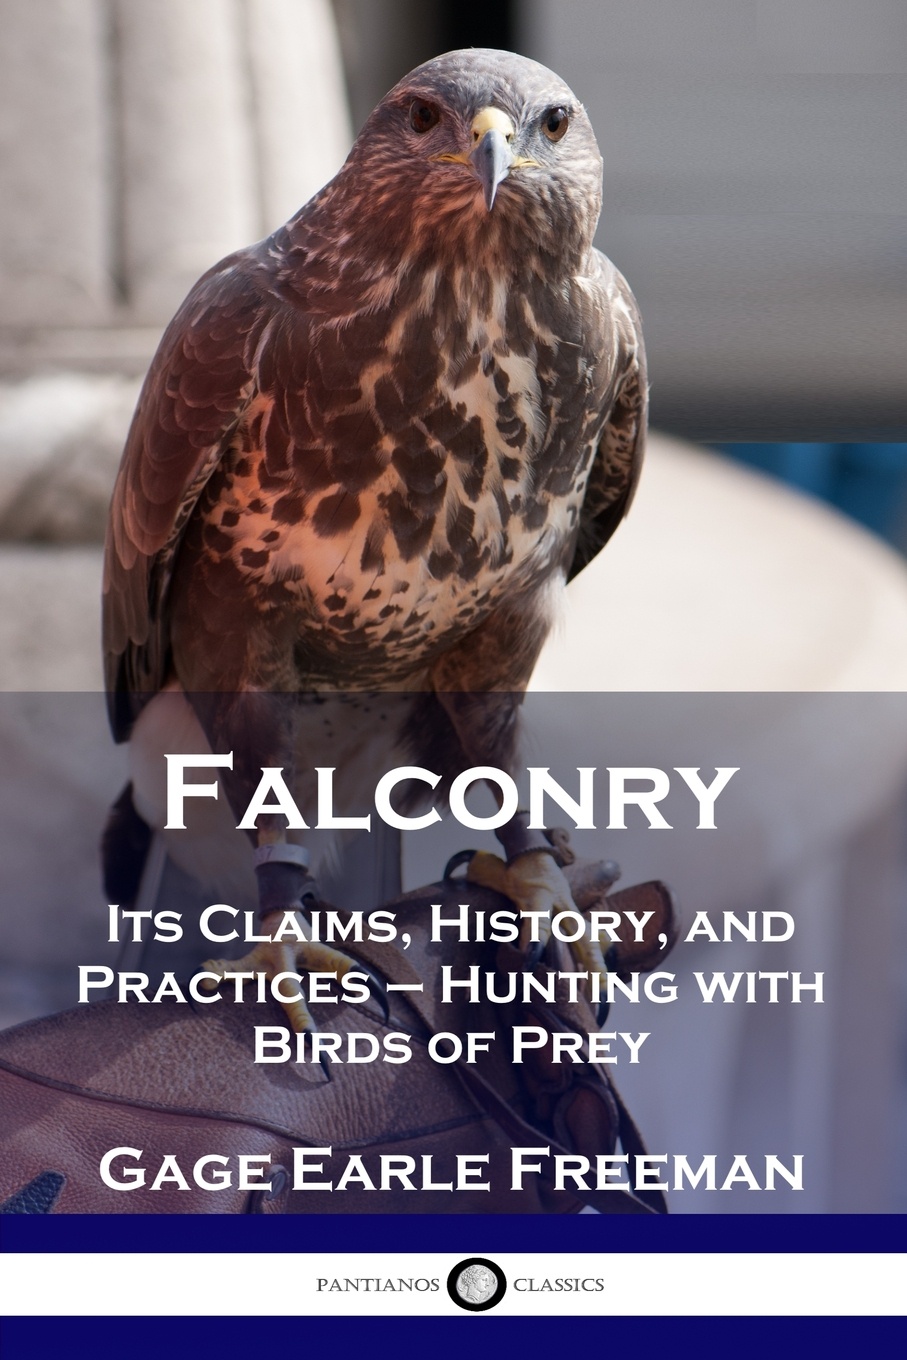 Falconry. Its Claims, History, and Practices - Hunting with Birds of Prey